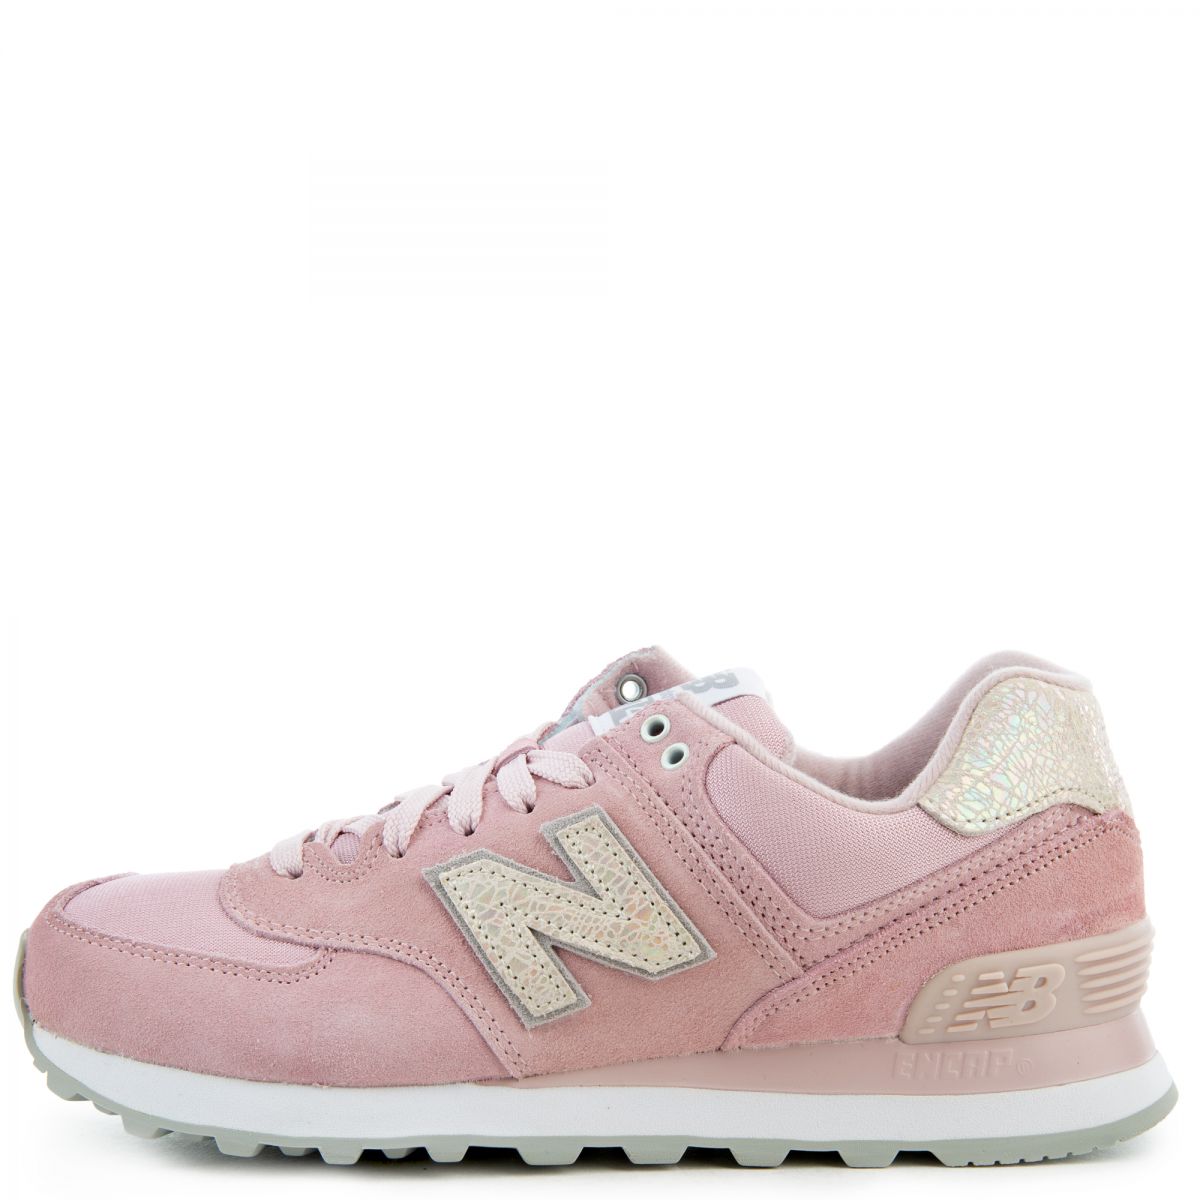 new balance 574 shattered pearl sneakers